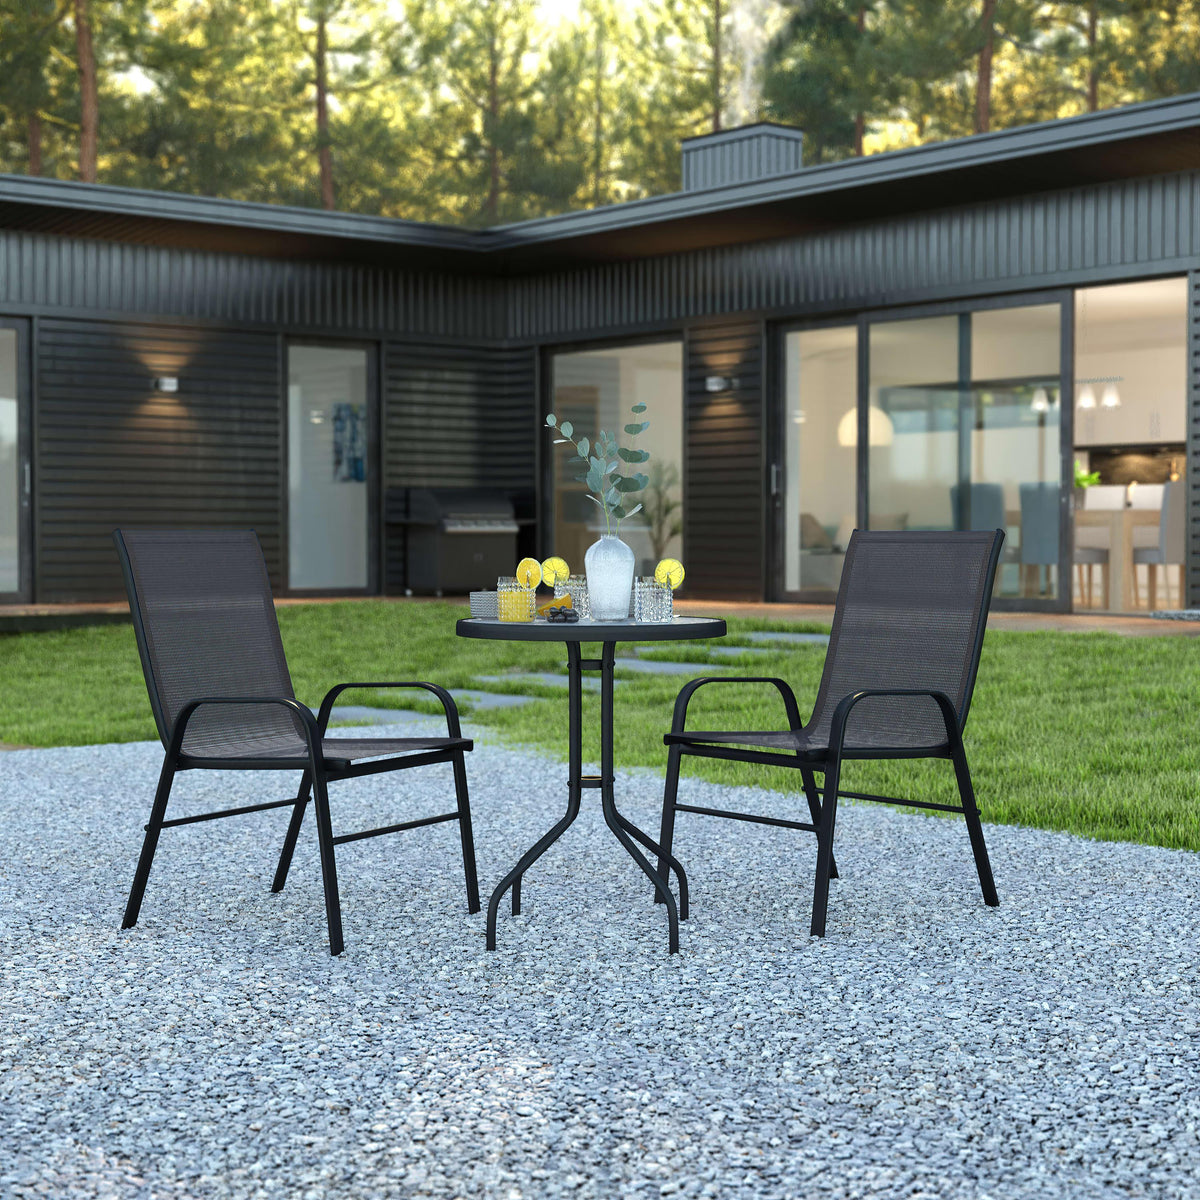 Black |#| 3 Piece Patio Dining Set - 23.75inch Round Glass Table, 2 Black Flex Stack Chairs